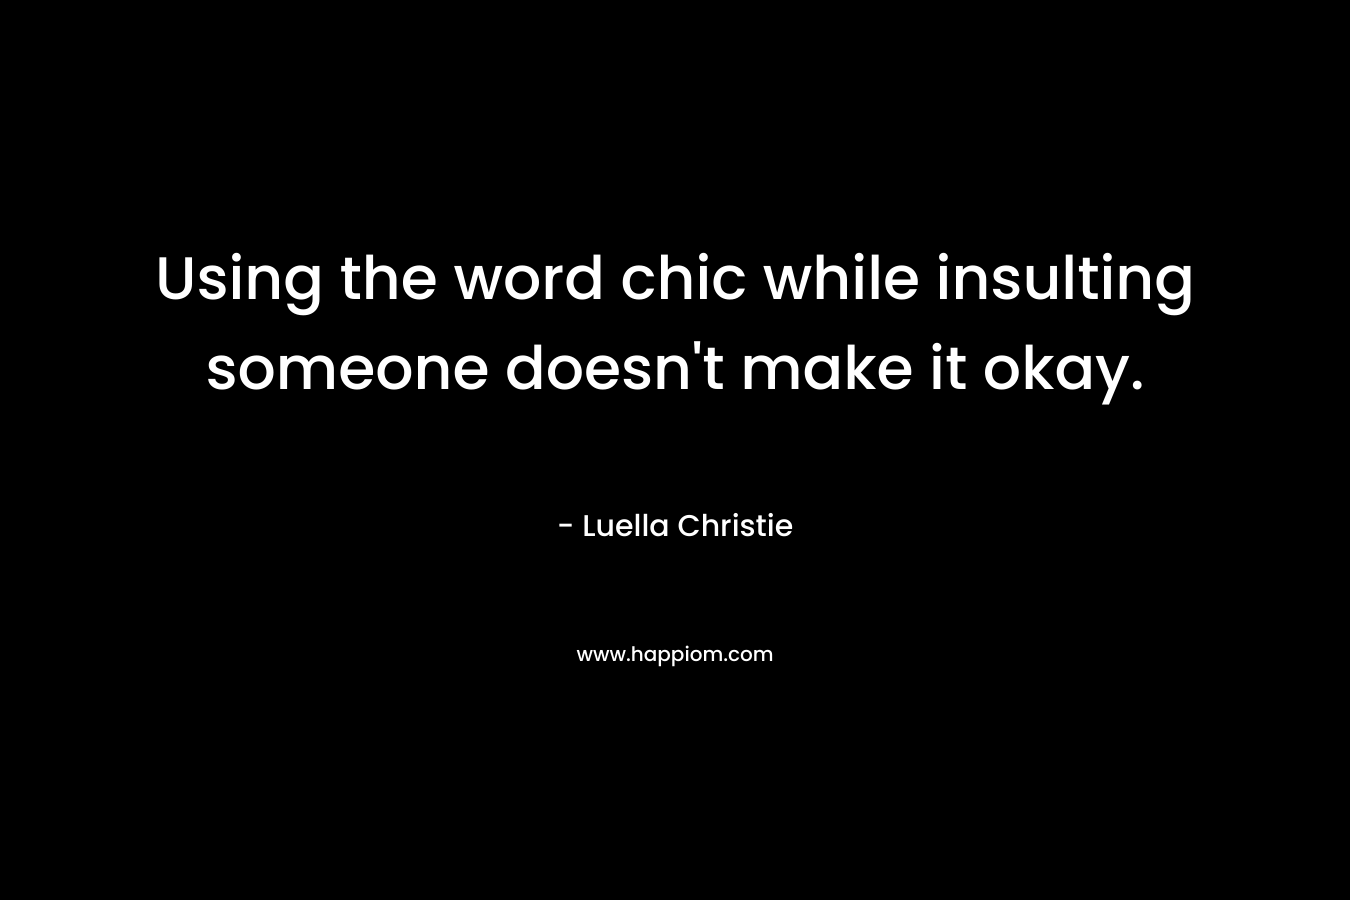 Using the word chic while insulting someone doesn’t make it okay. – Luella Christie